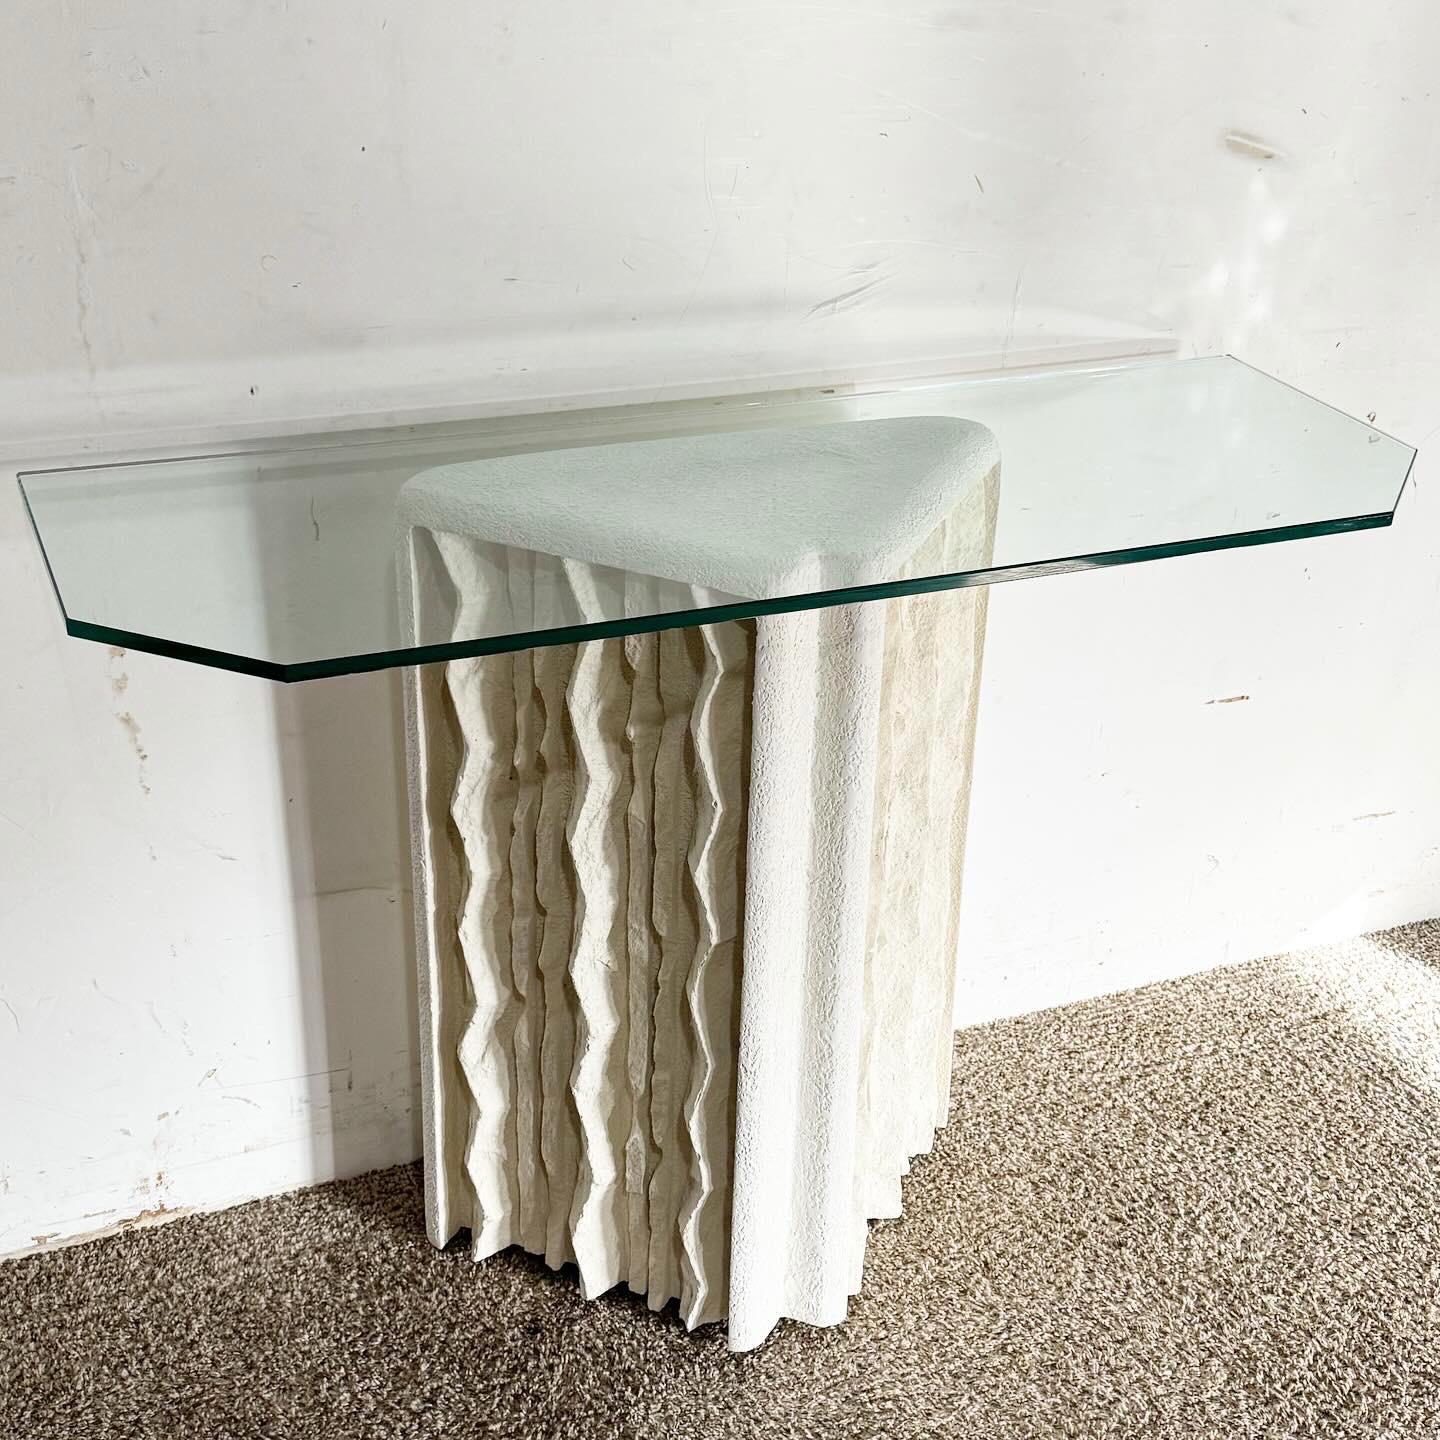 Experience the distinctiveness of the Postmodern era with the Cast Plaster Glass Top Console Table. This table features a uniquely designed cast plaster pedestal, measuring 20.5‚Äùw, 10‚Äùd, 29‚Äùh, supporting a sleek glass top. Its combination of